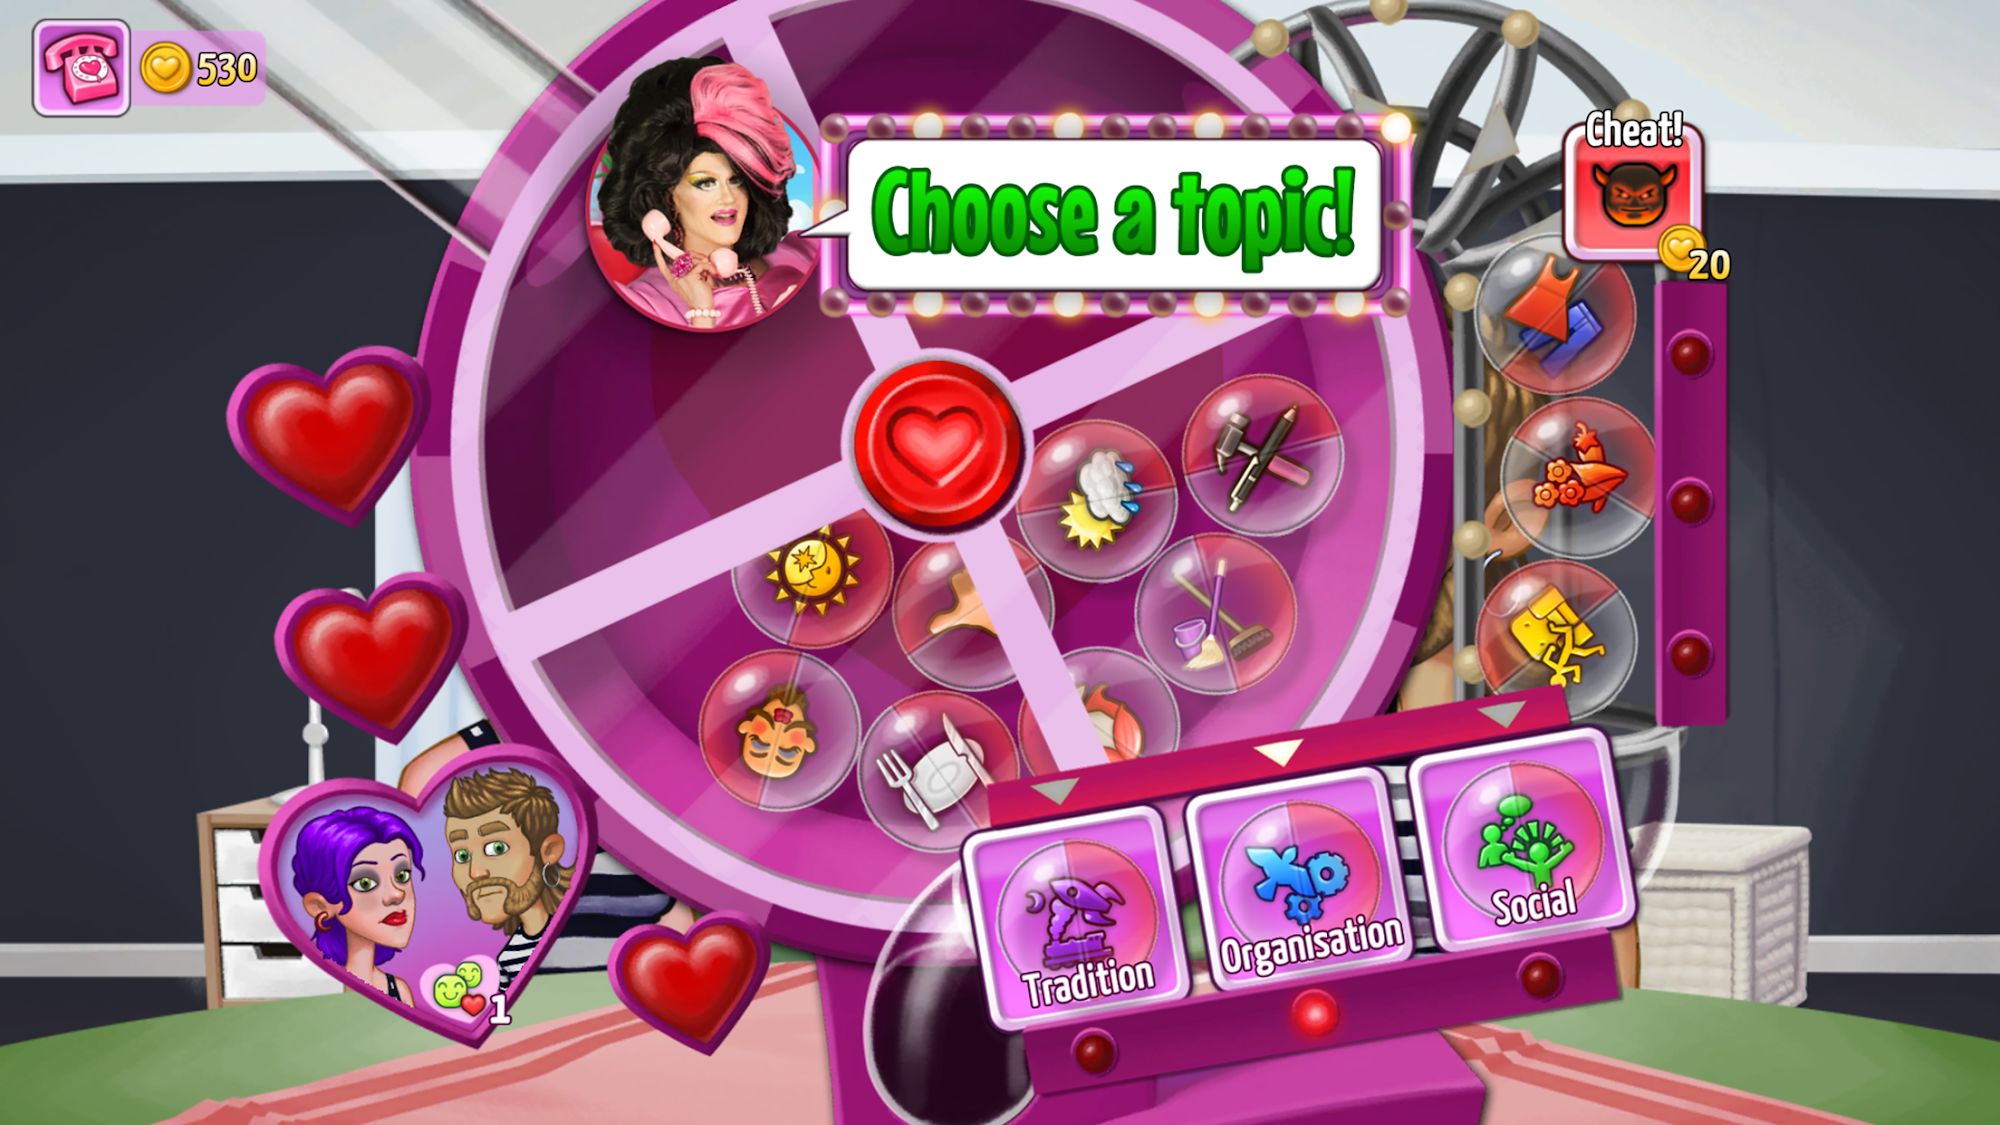 Kitty Powers' Love Life - Android game screenshots.